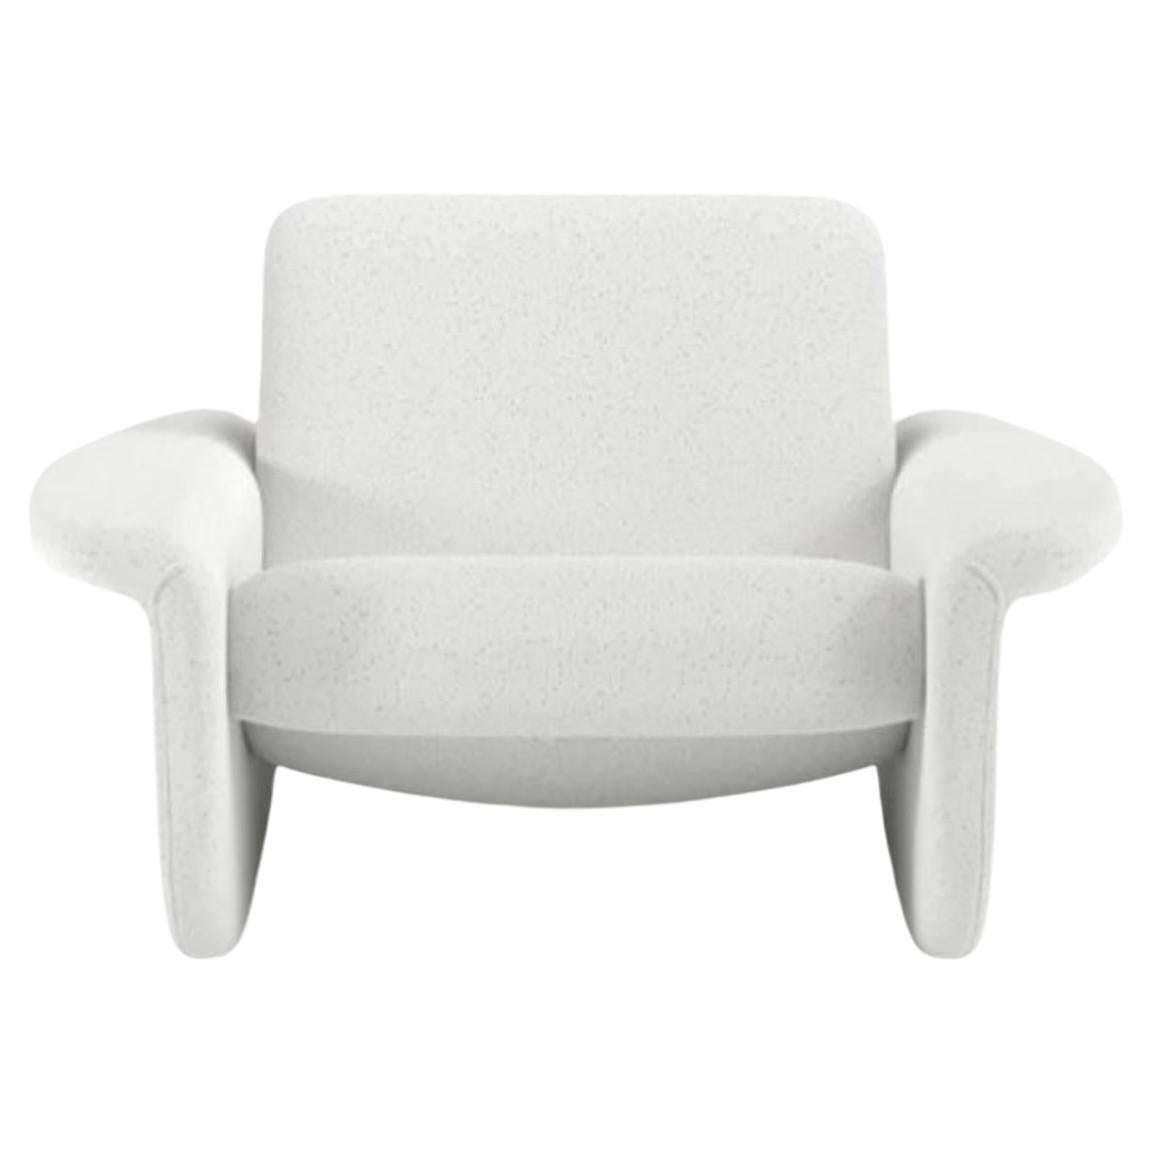 Canoa Lounge Chair by Wentz For Sale